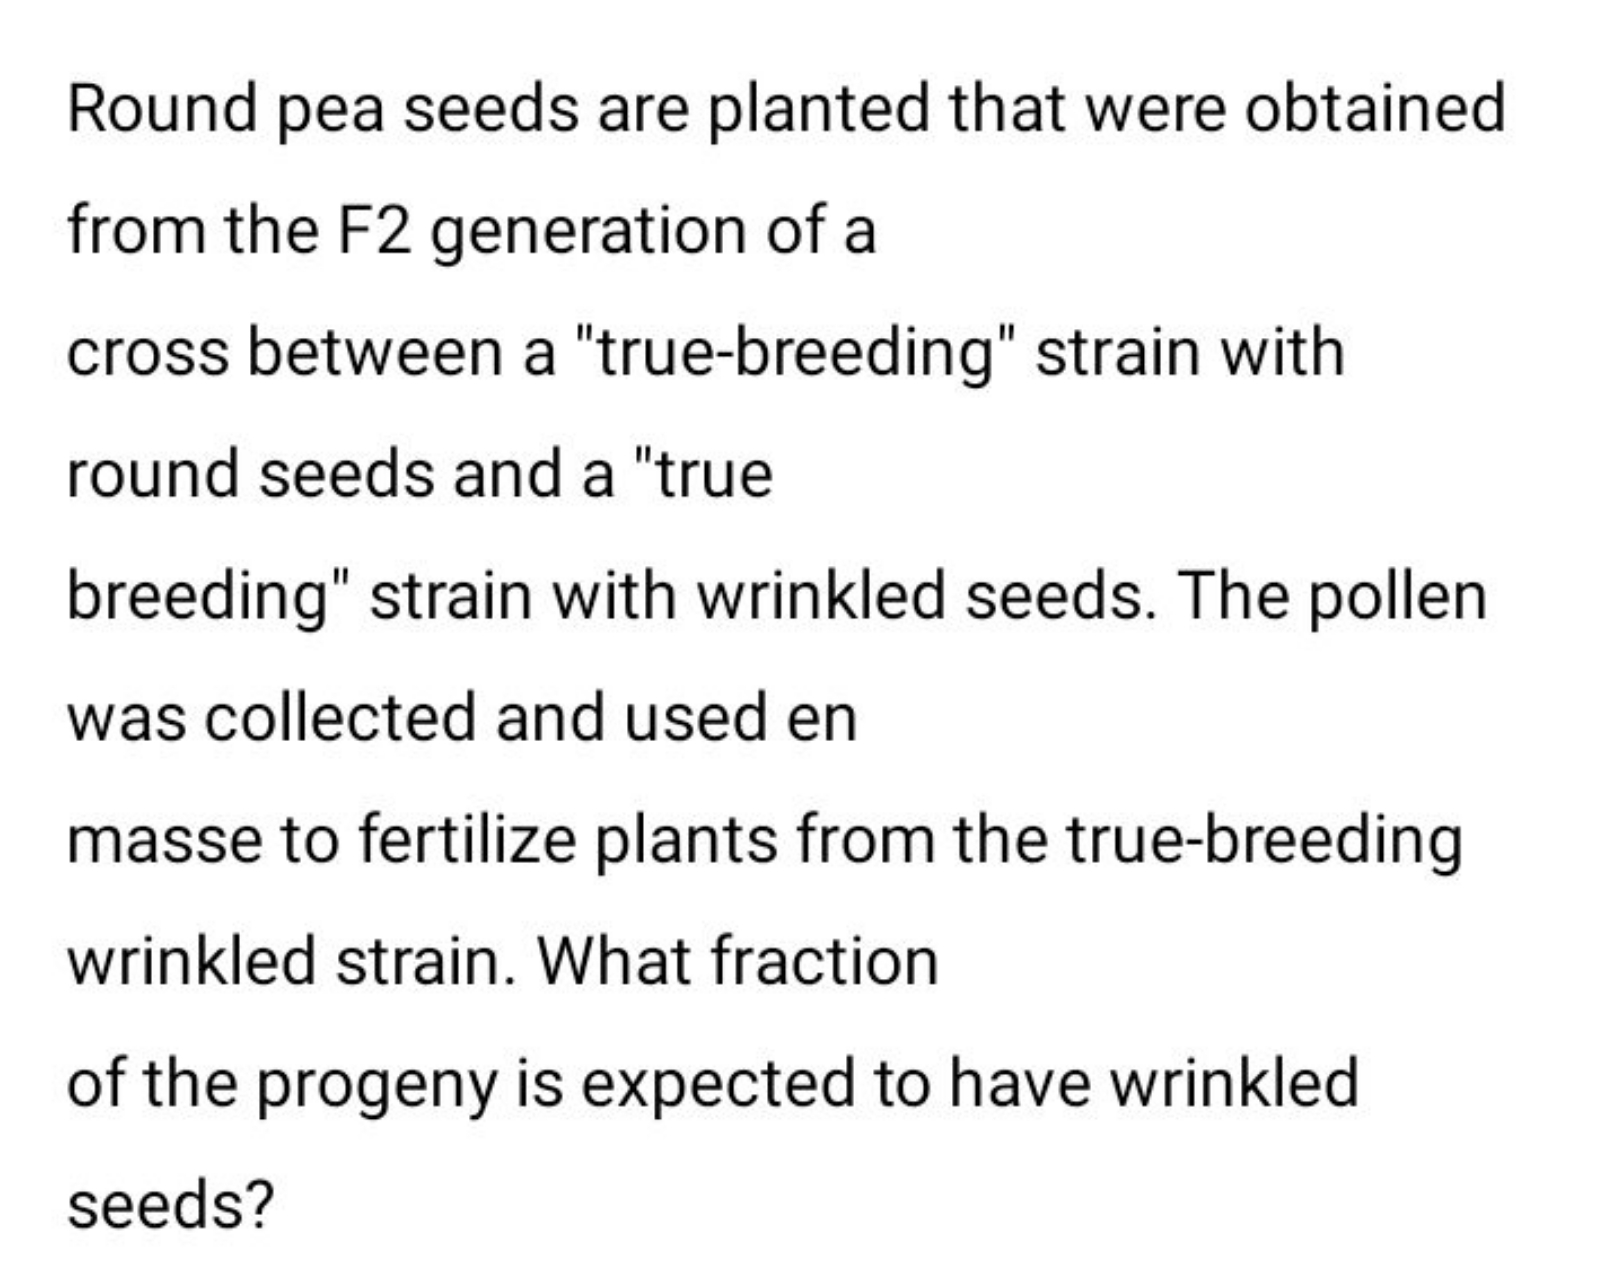 Round pea seeds are planted that were obtained from the F2 generation 